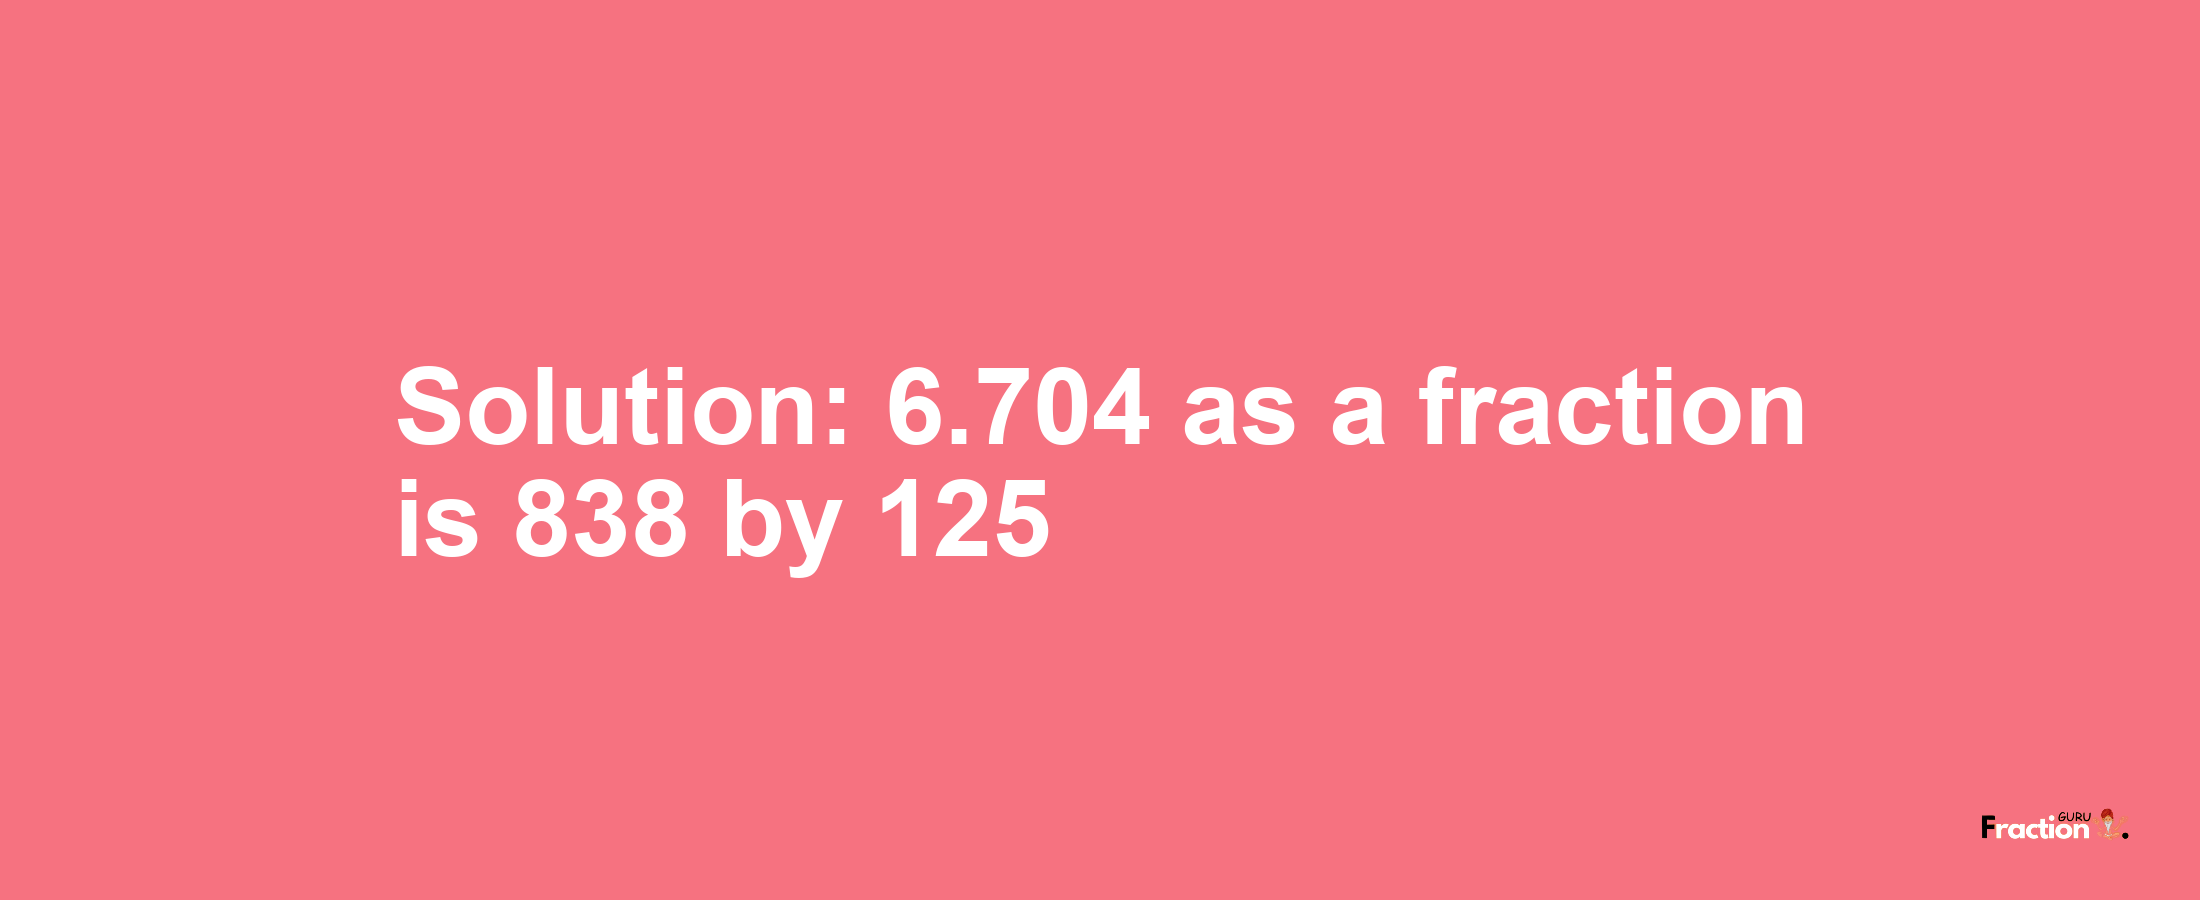 Solution:6.704 as a fraction is 838/125